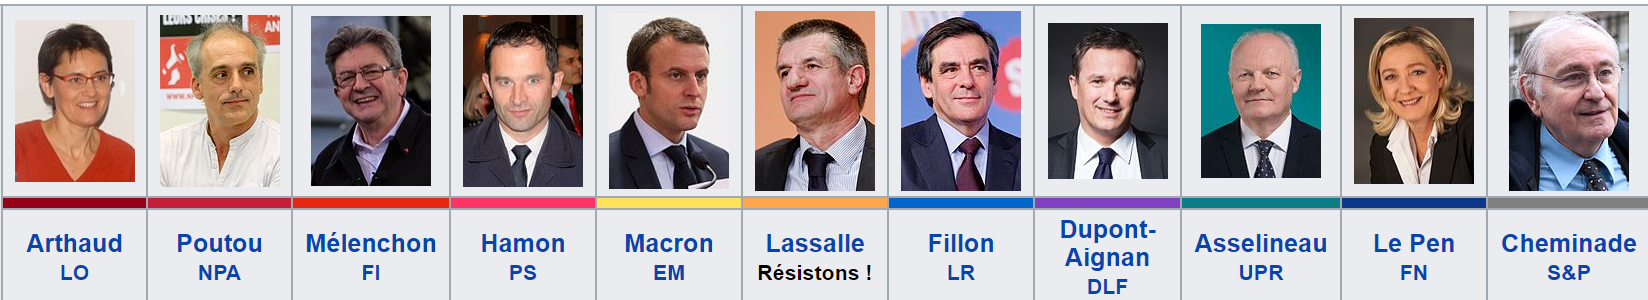 20170421 French Election Candidates